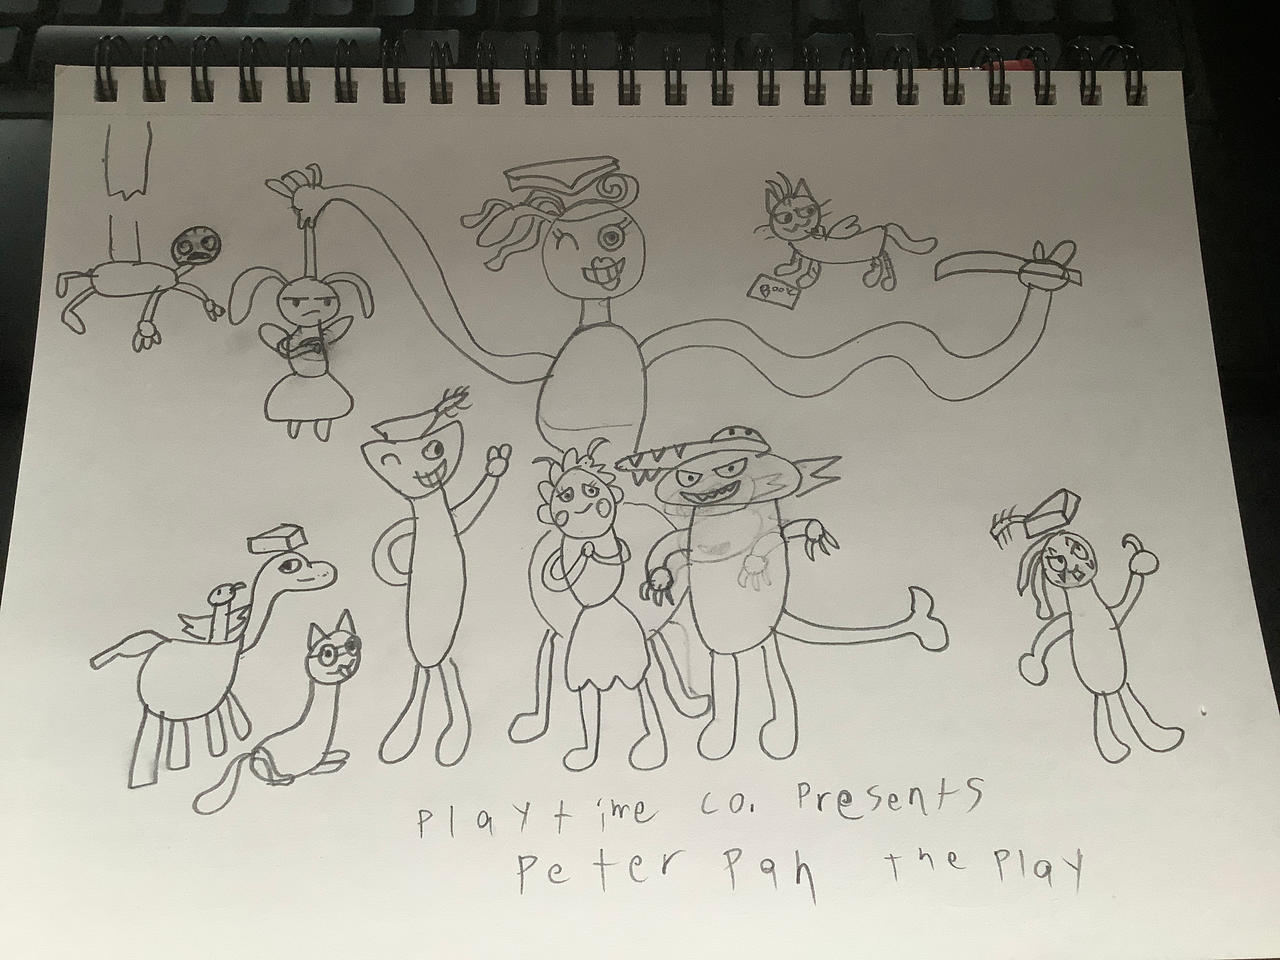 Playtime co presents Peter Pan the play by djrotom on DeviantArt